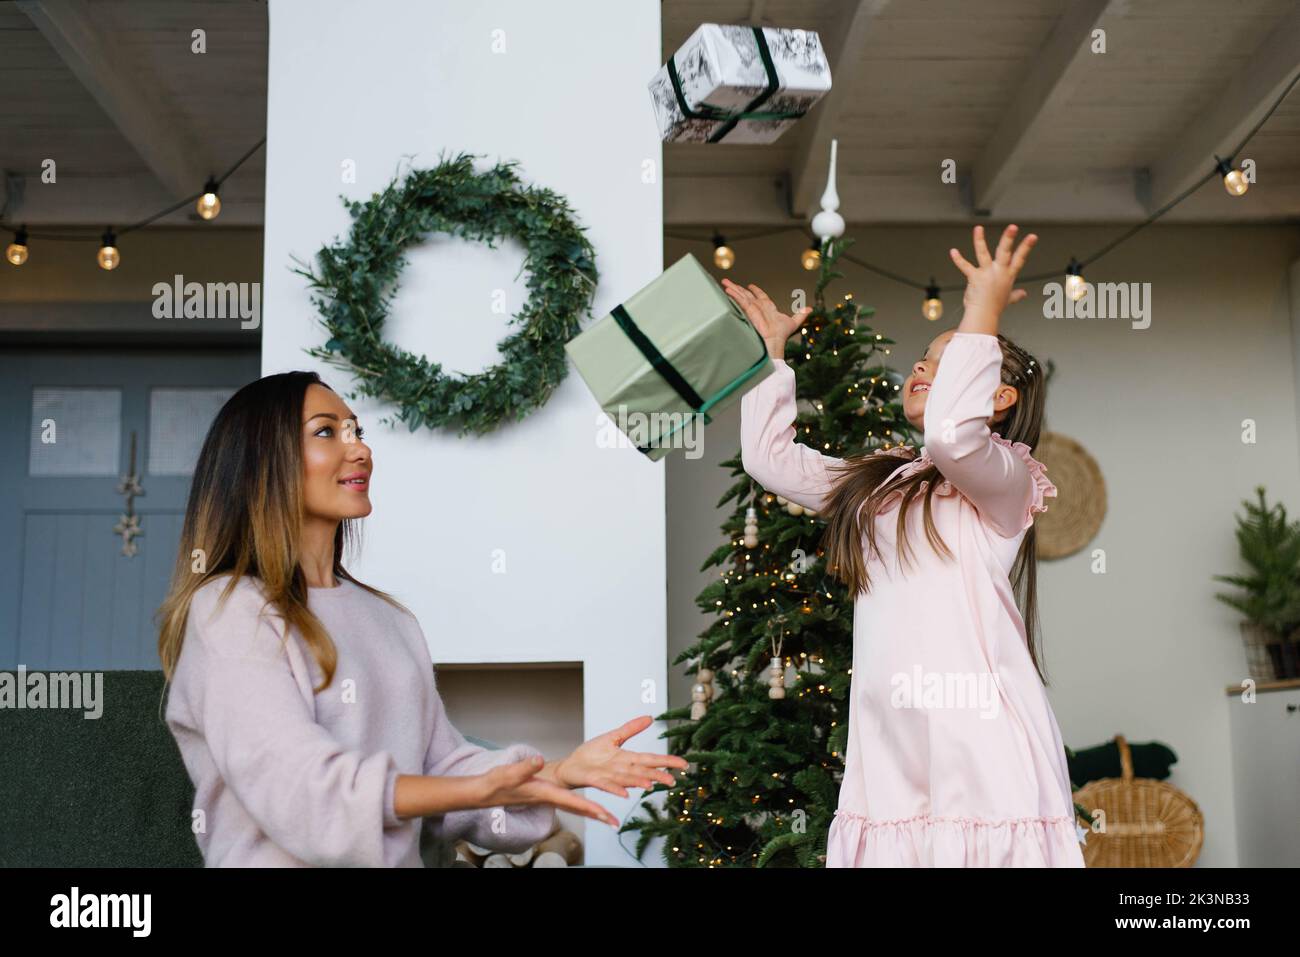 Mother and daughter celebrate at the Christmas tree, throwing up gifts Stock Photo